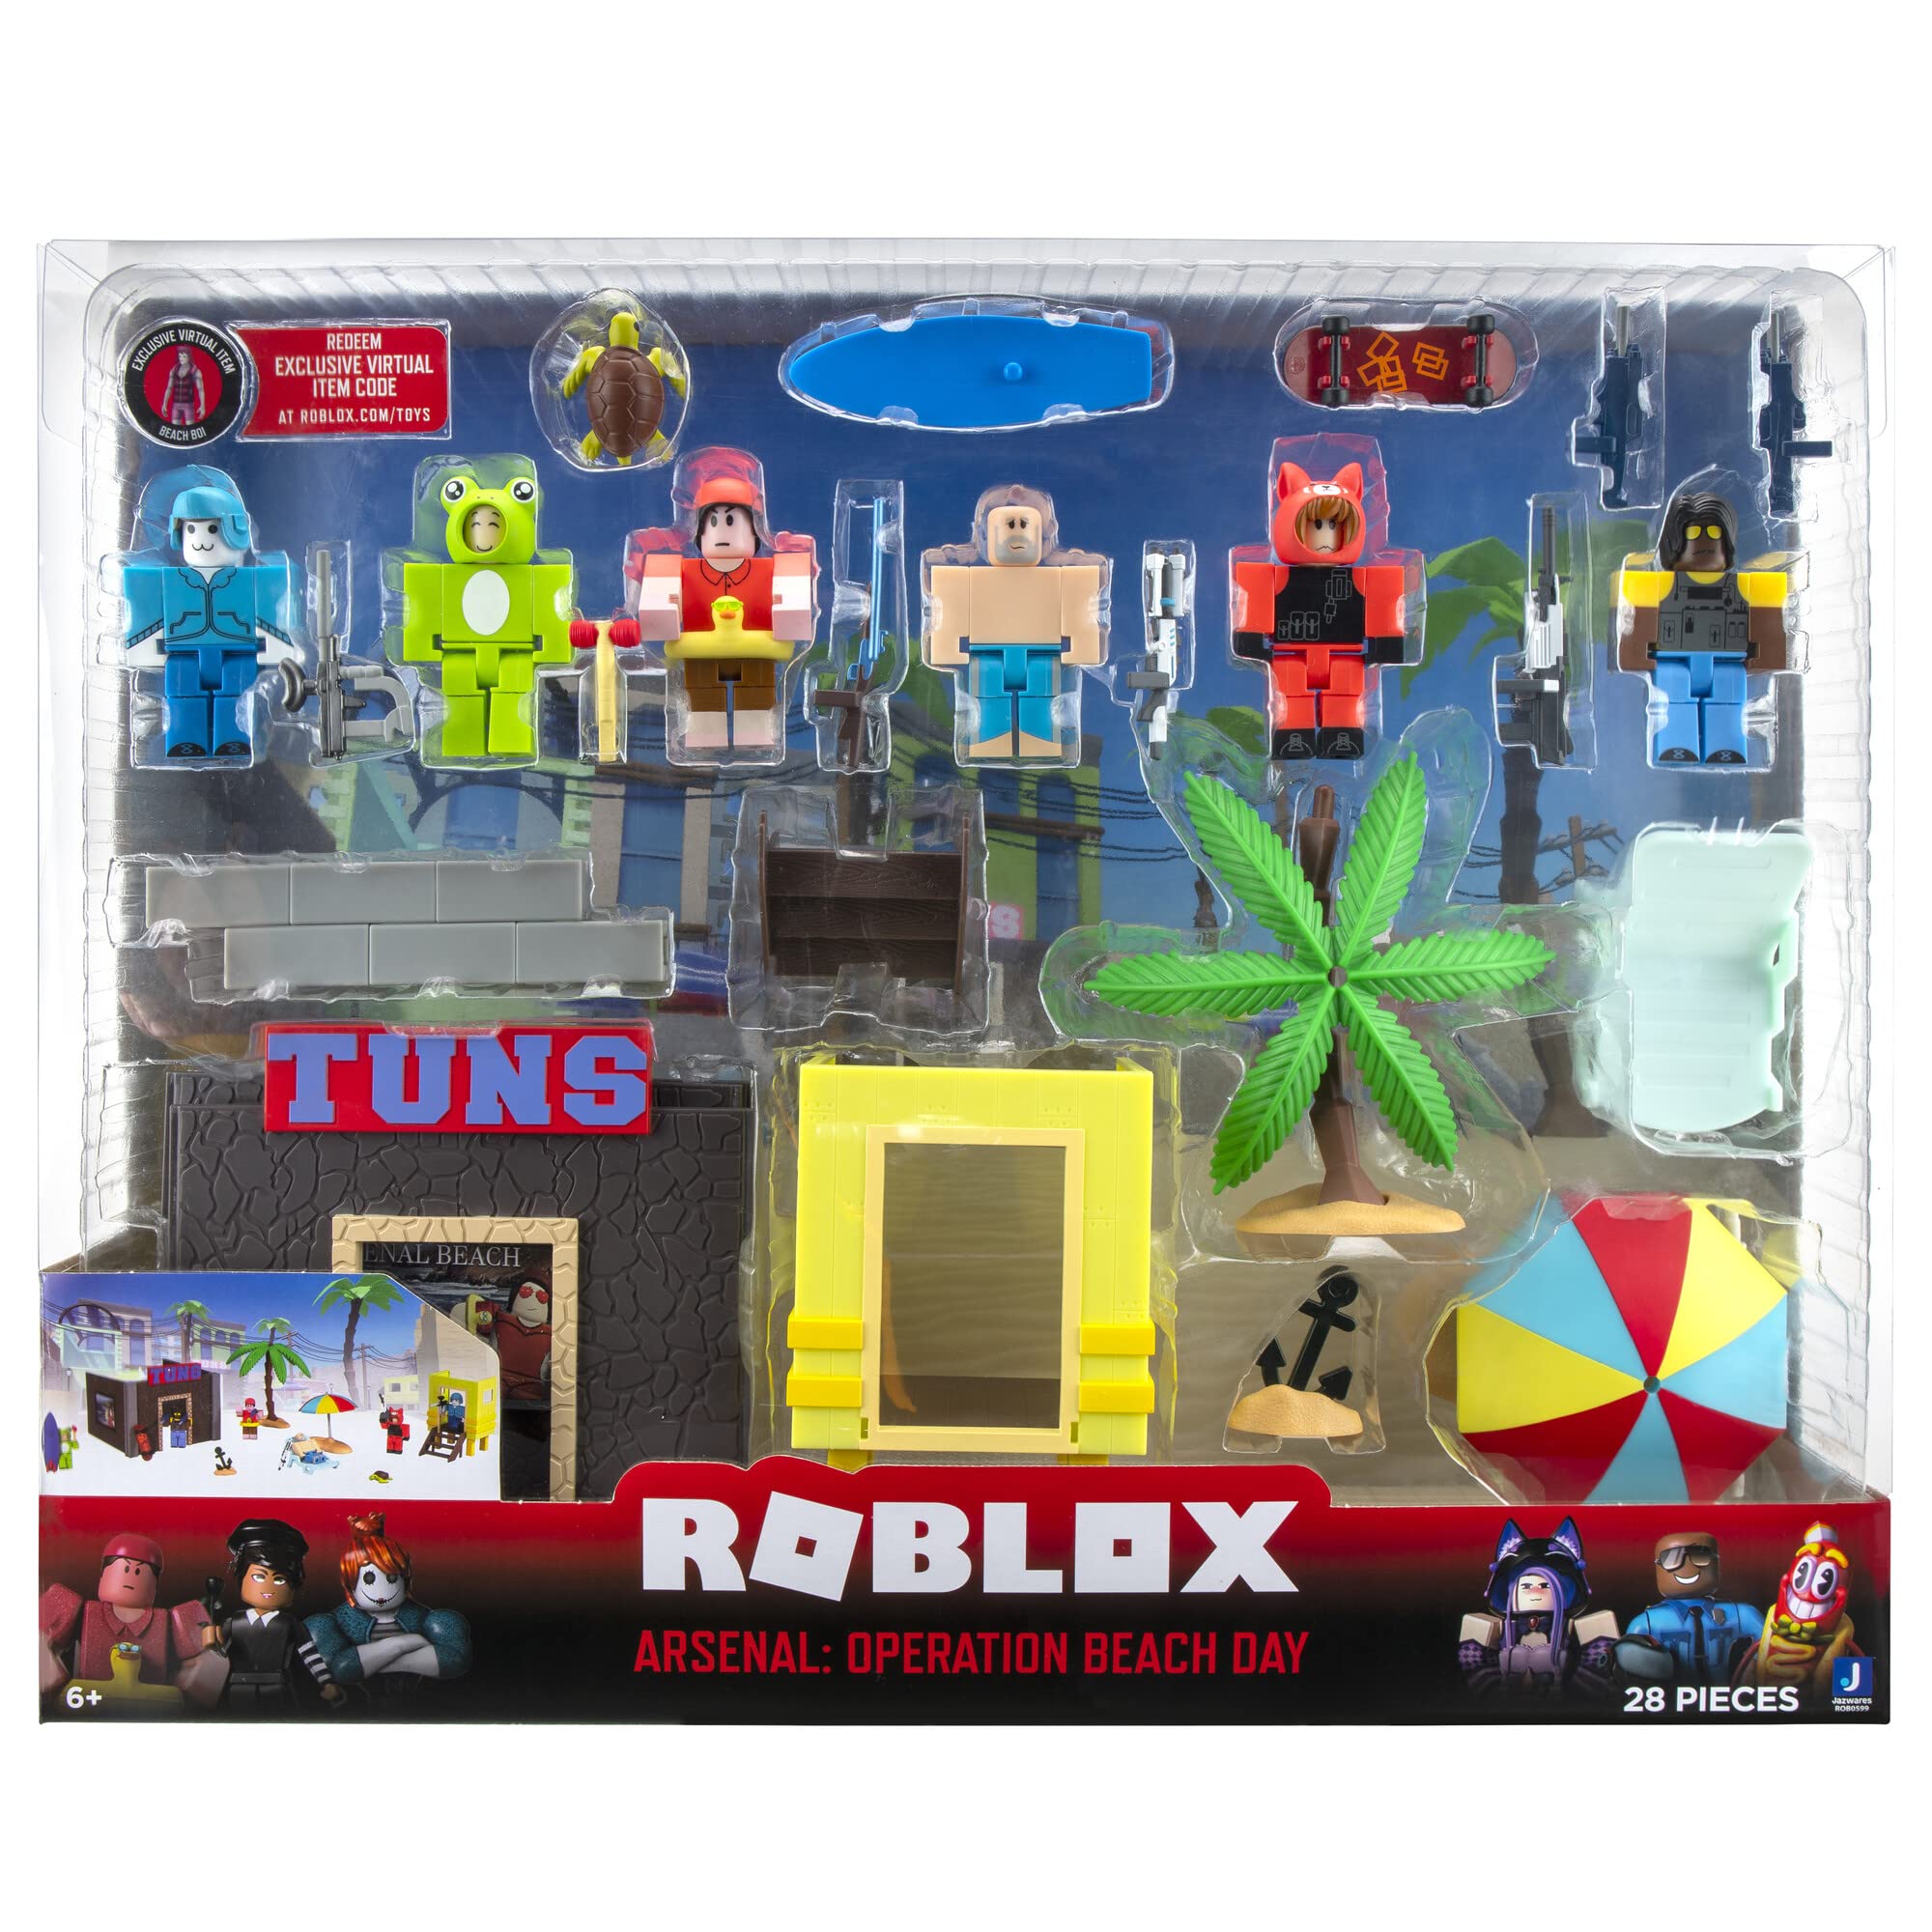 28-Pc Roblox Action Collection: Arsenal Operation Beach Day Playset w/ Exclusive Virtual Item $16.50 + Free Shipping w/ Prime or on $25+